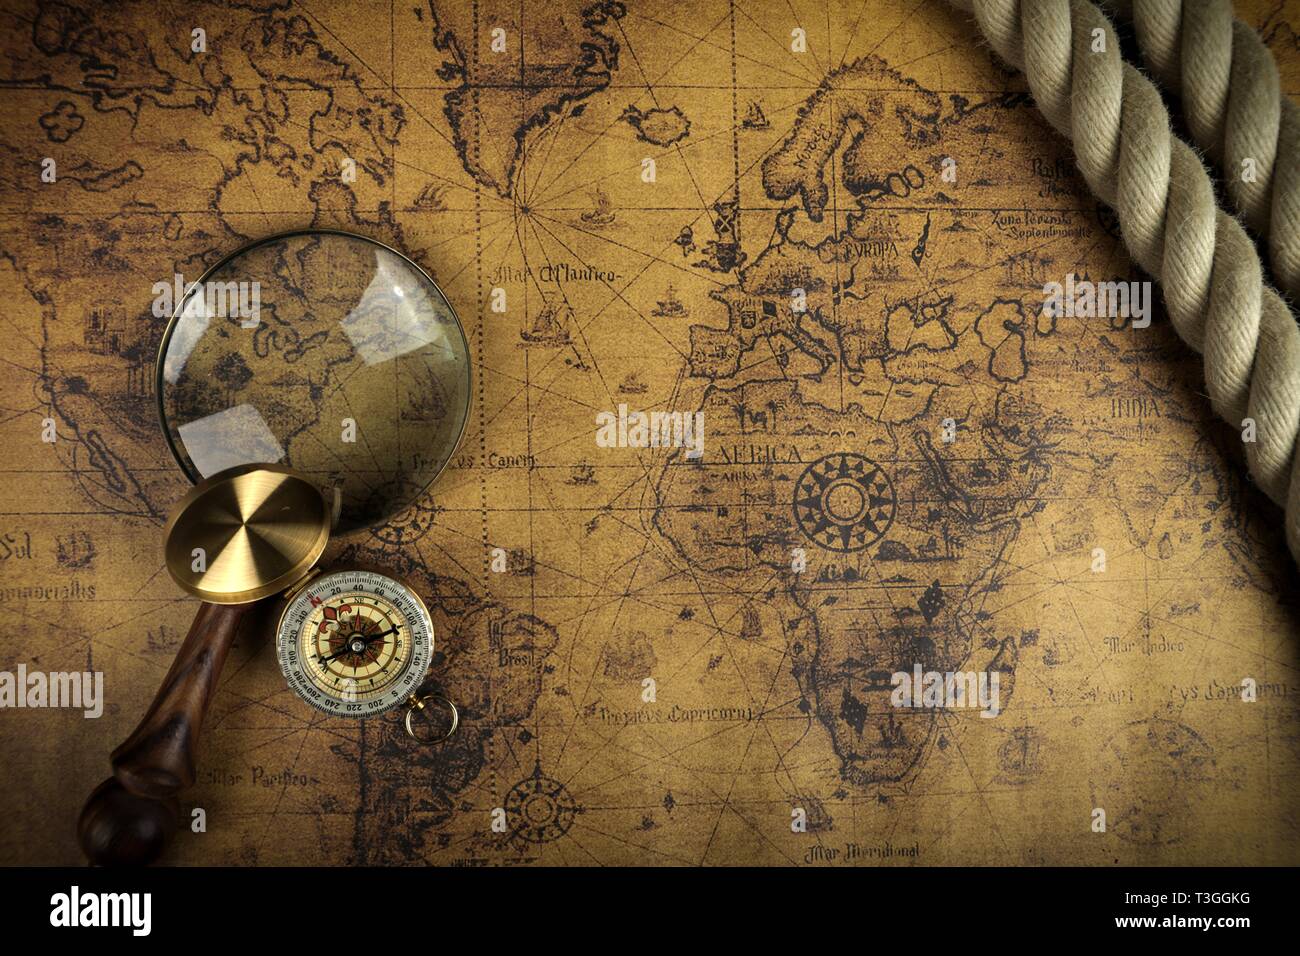 Vintage Compass and magnifying glass lies on an ancient world map - adventure stories background Stock Photo